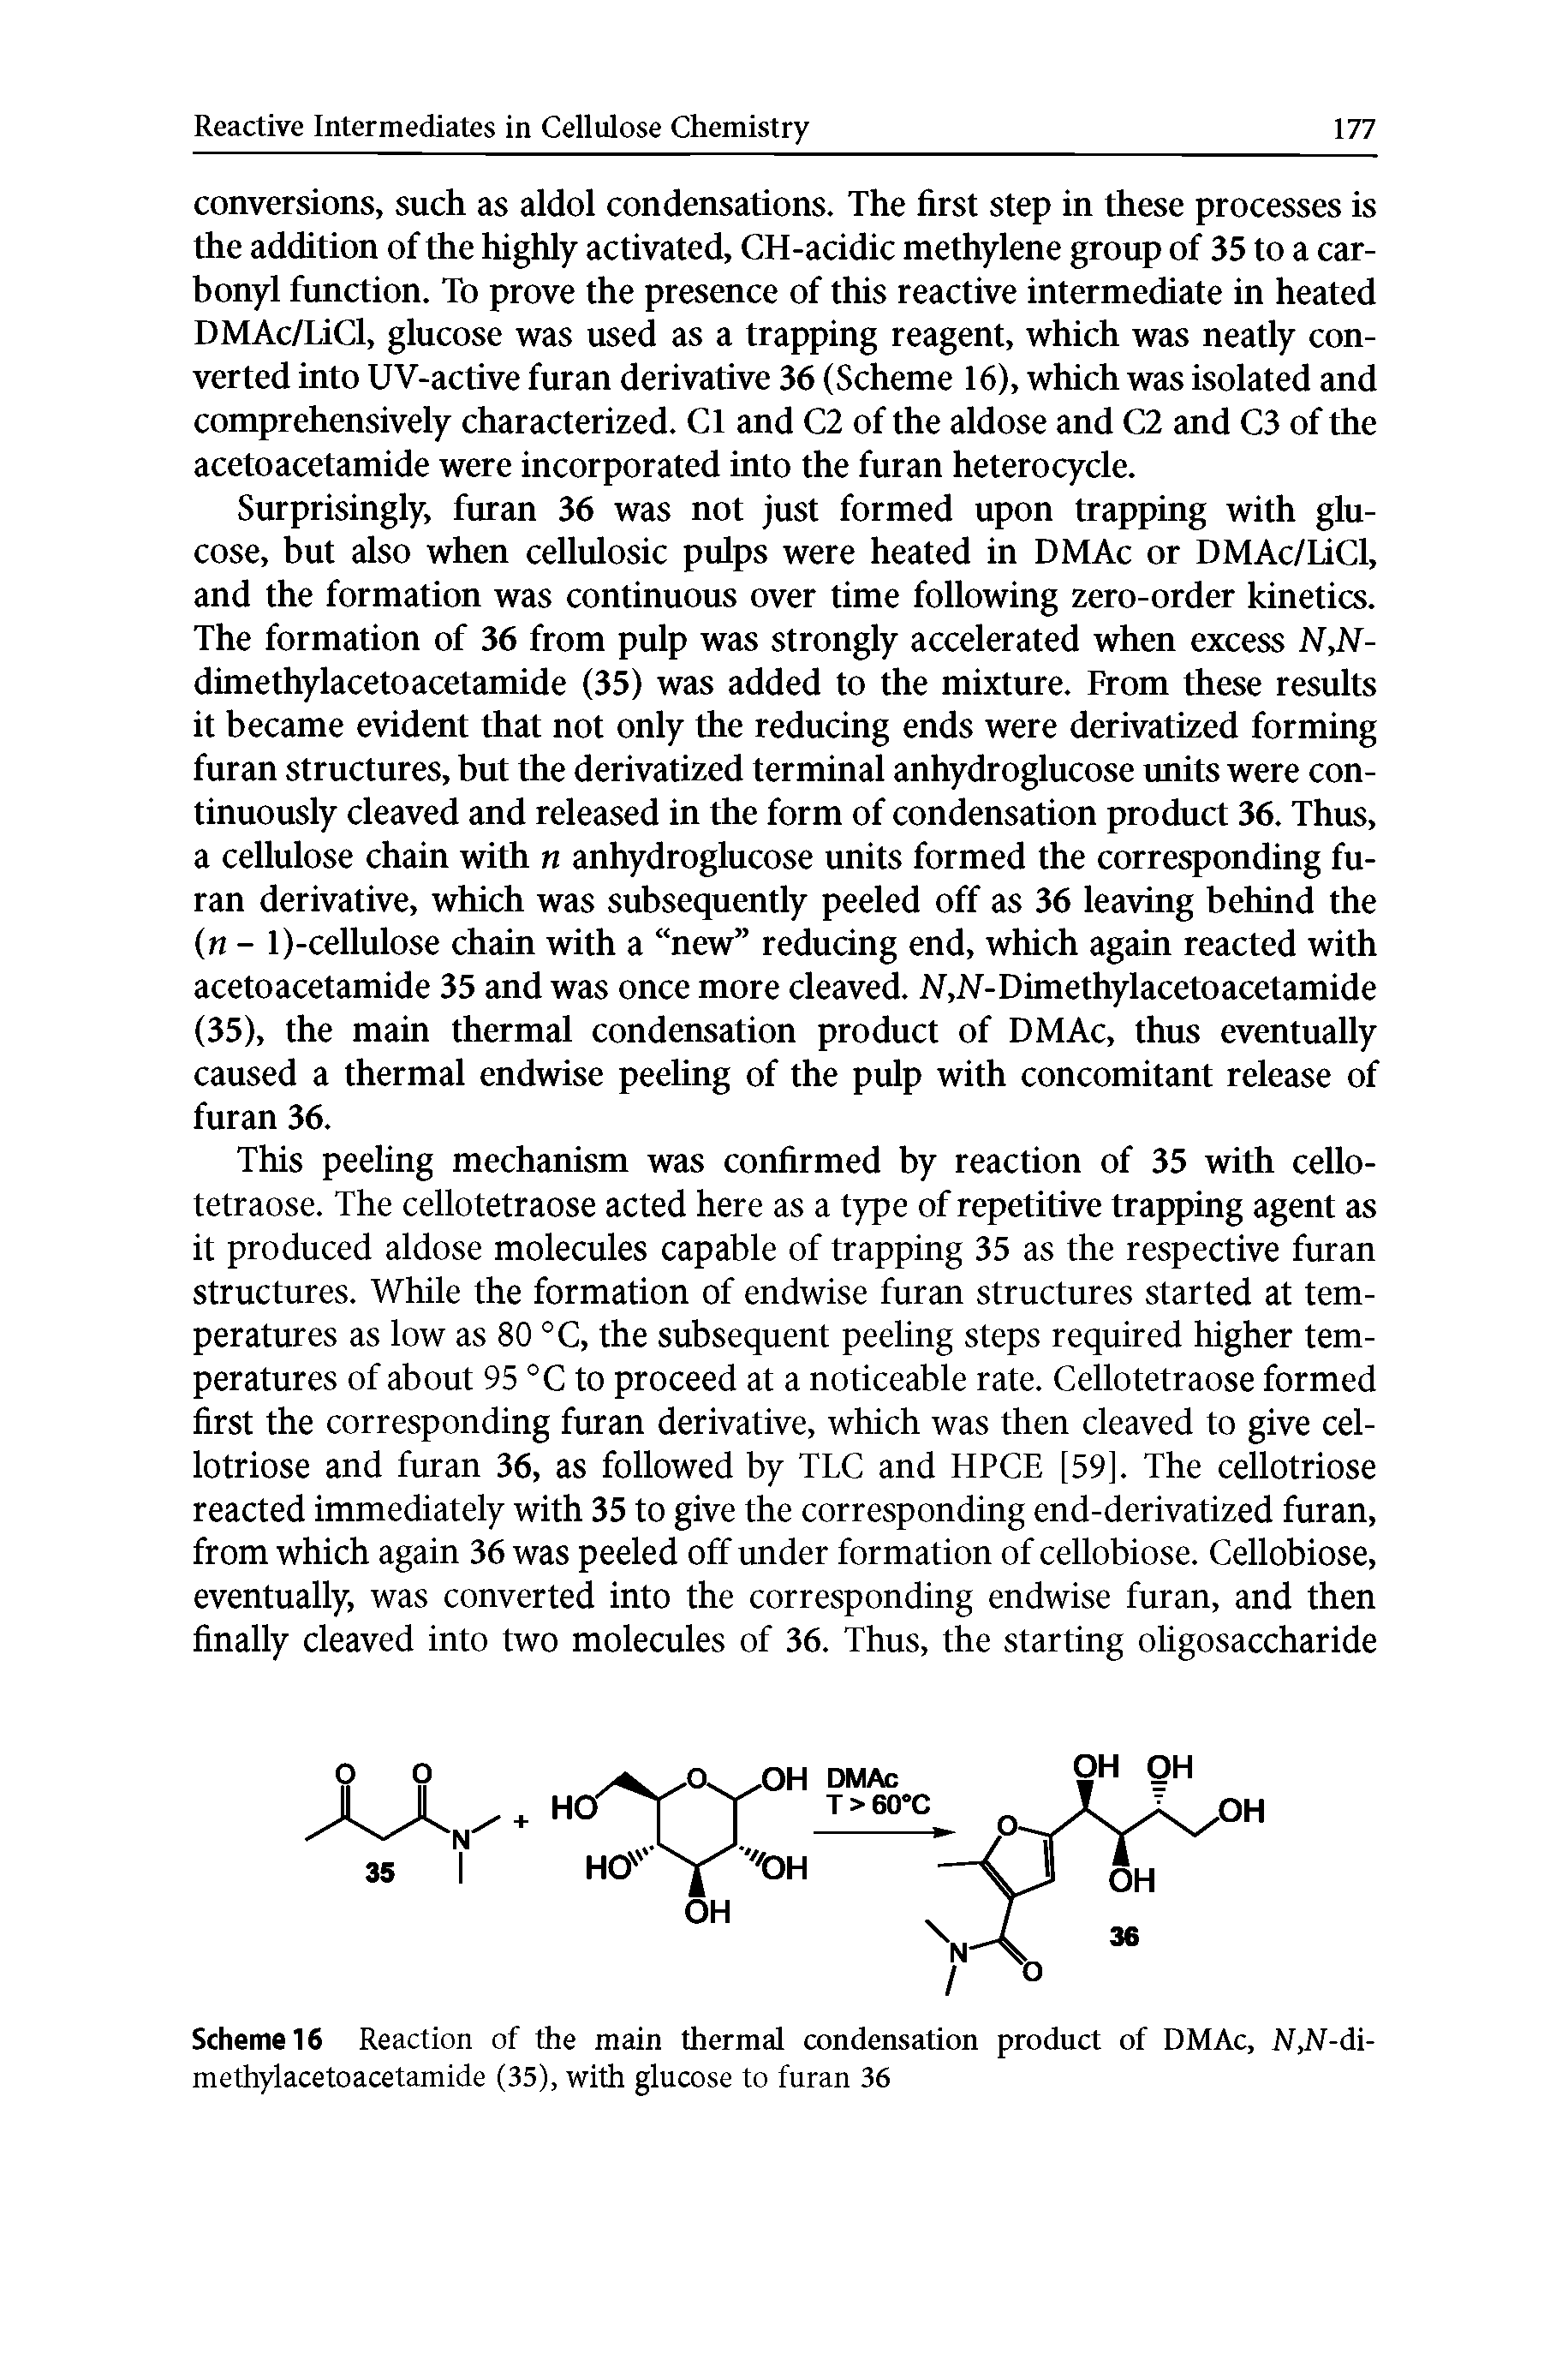 Scheme 16 Reaction of the main thermal condensation product of DMAc, N>N-di-methylacetoacetamide (35), with glucose to furan 36...